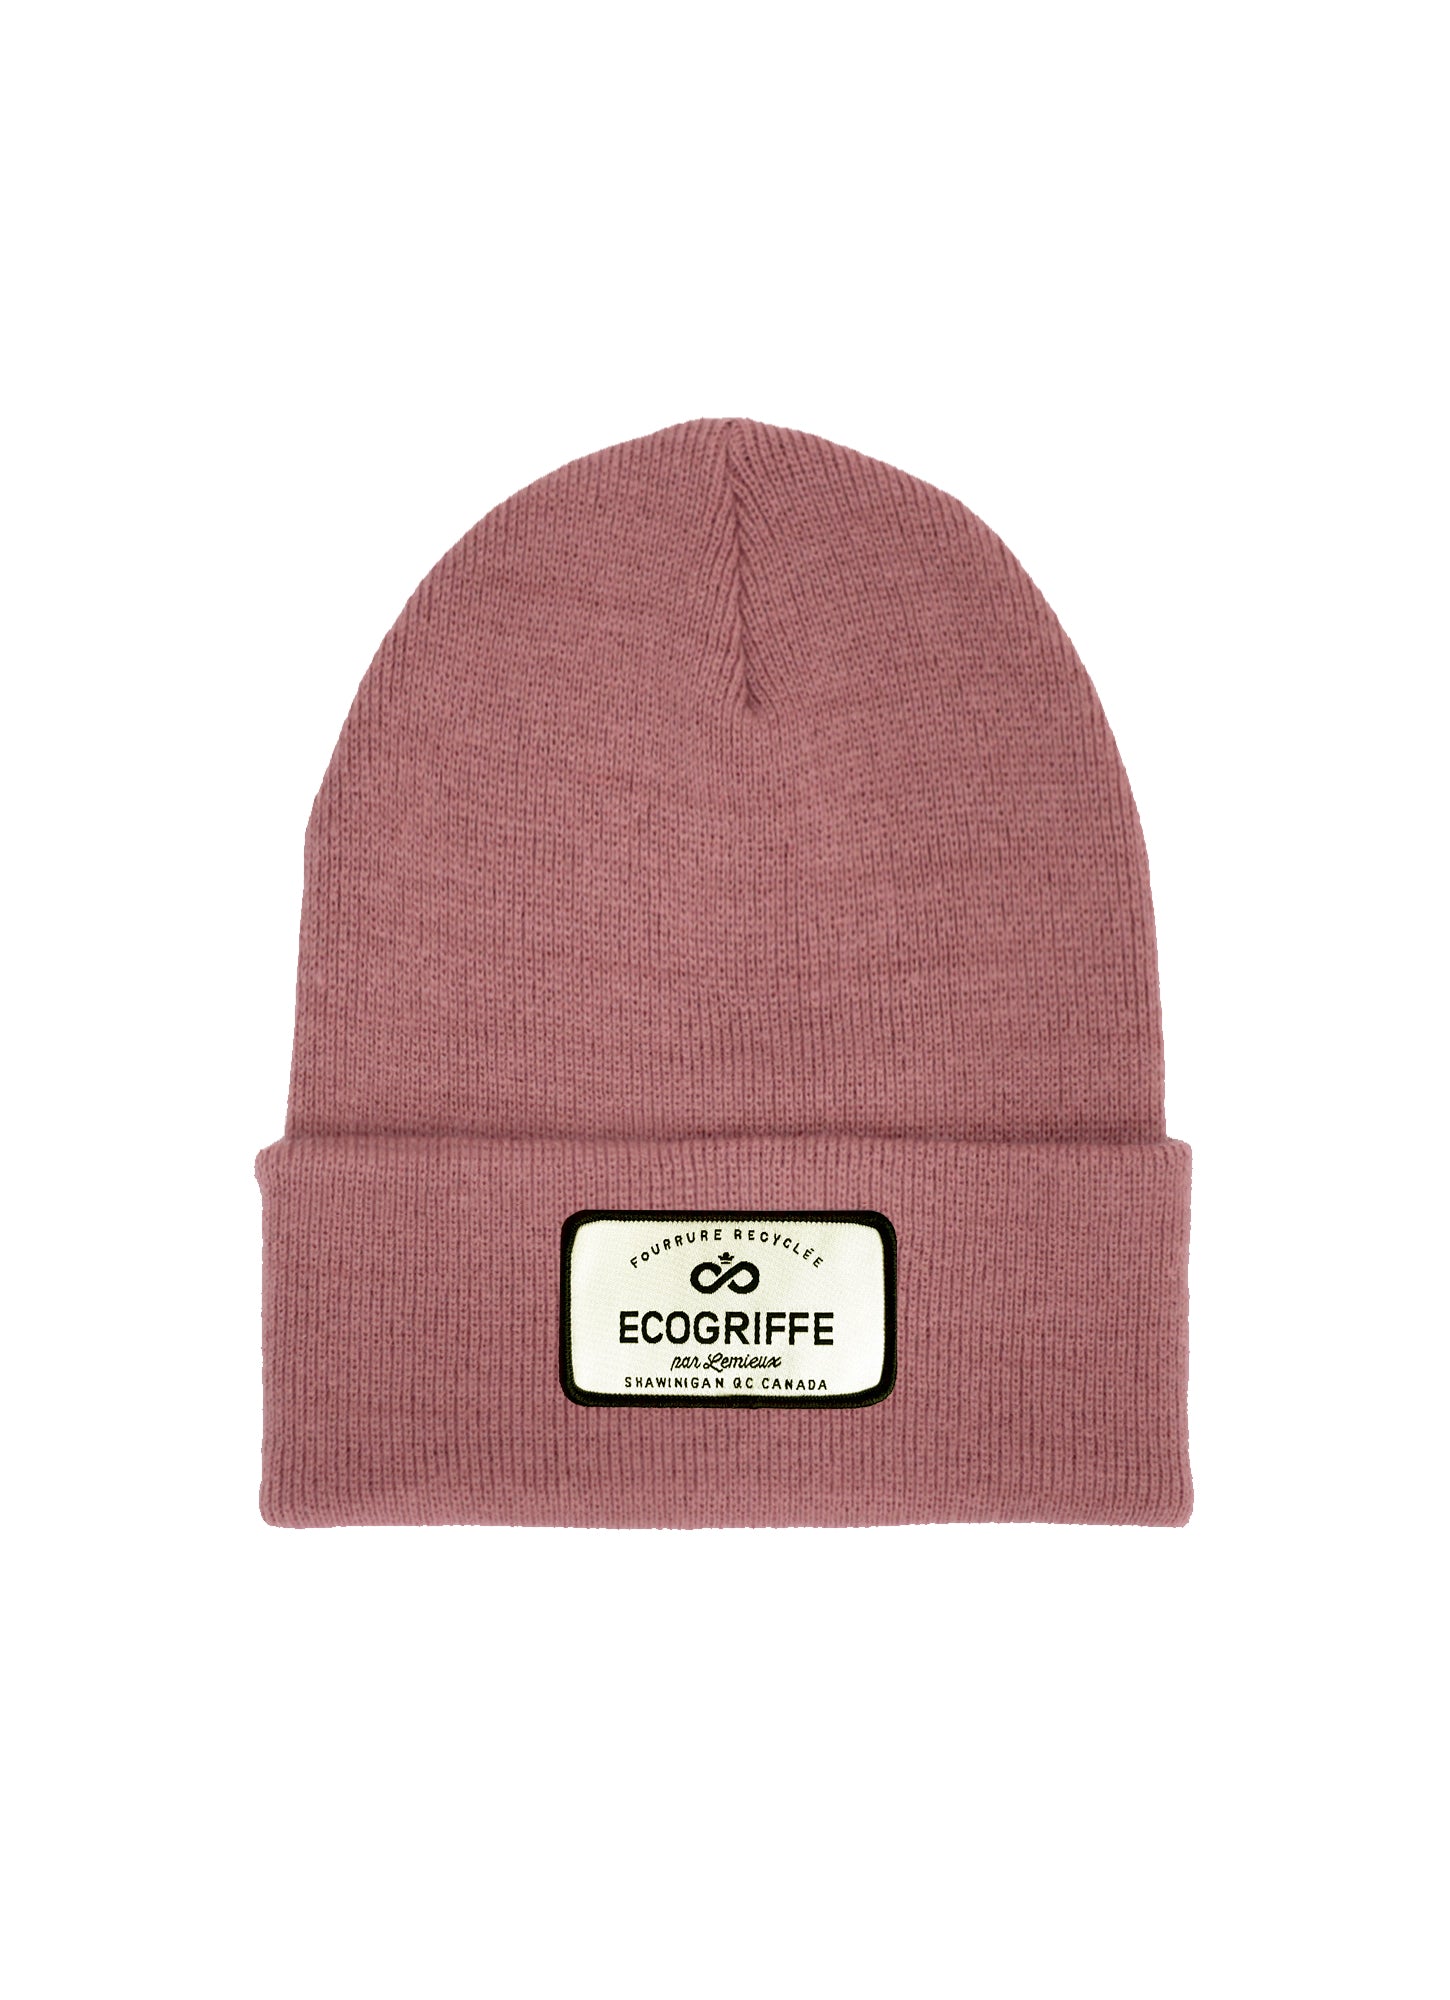 Tuque rose cendré Tradition - taille adulte